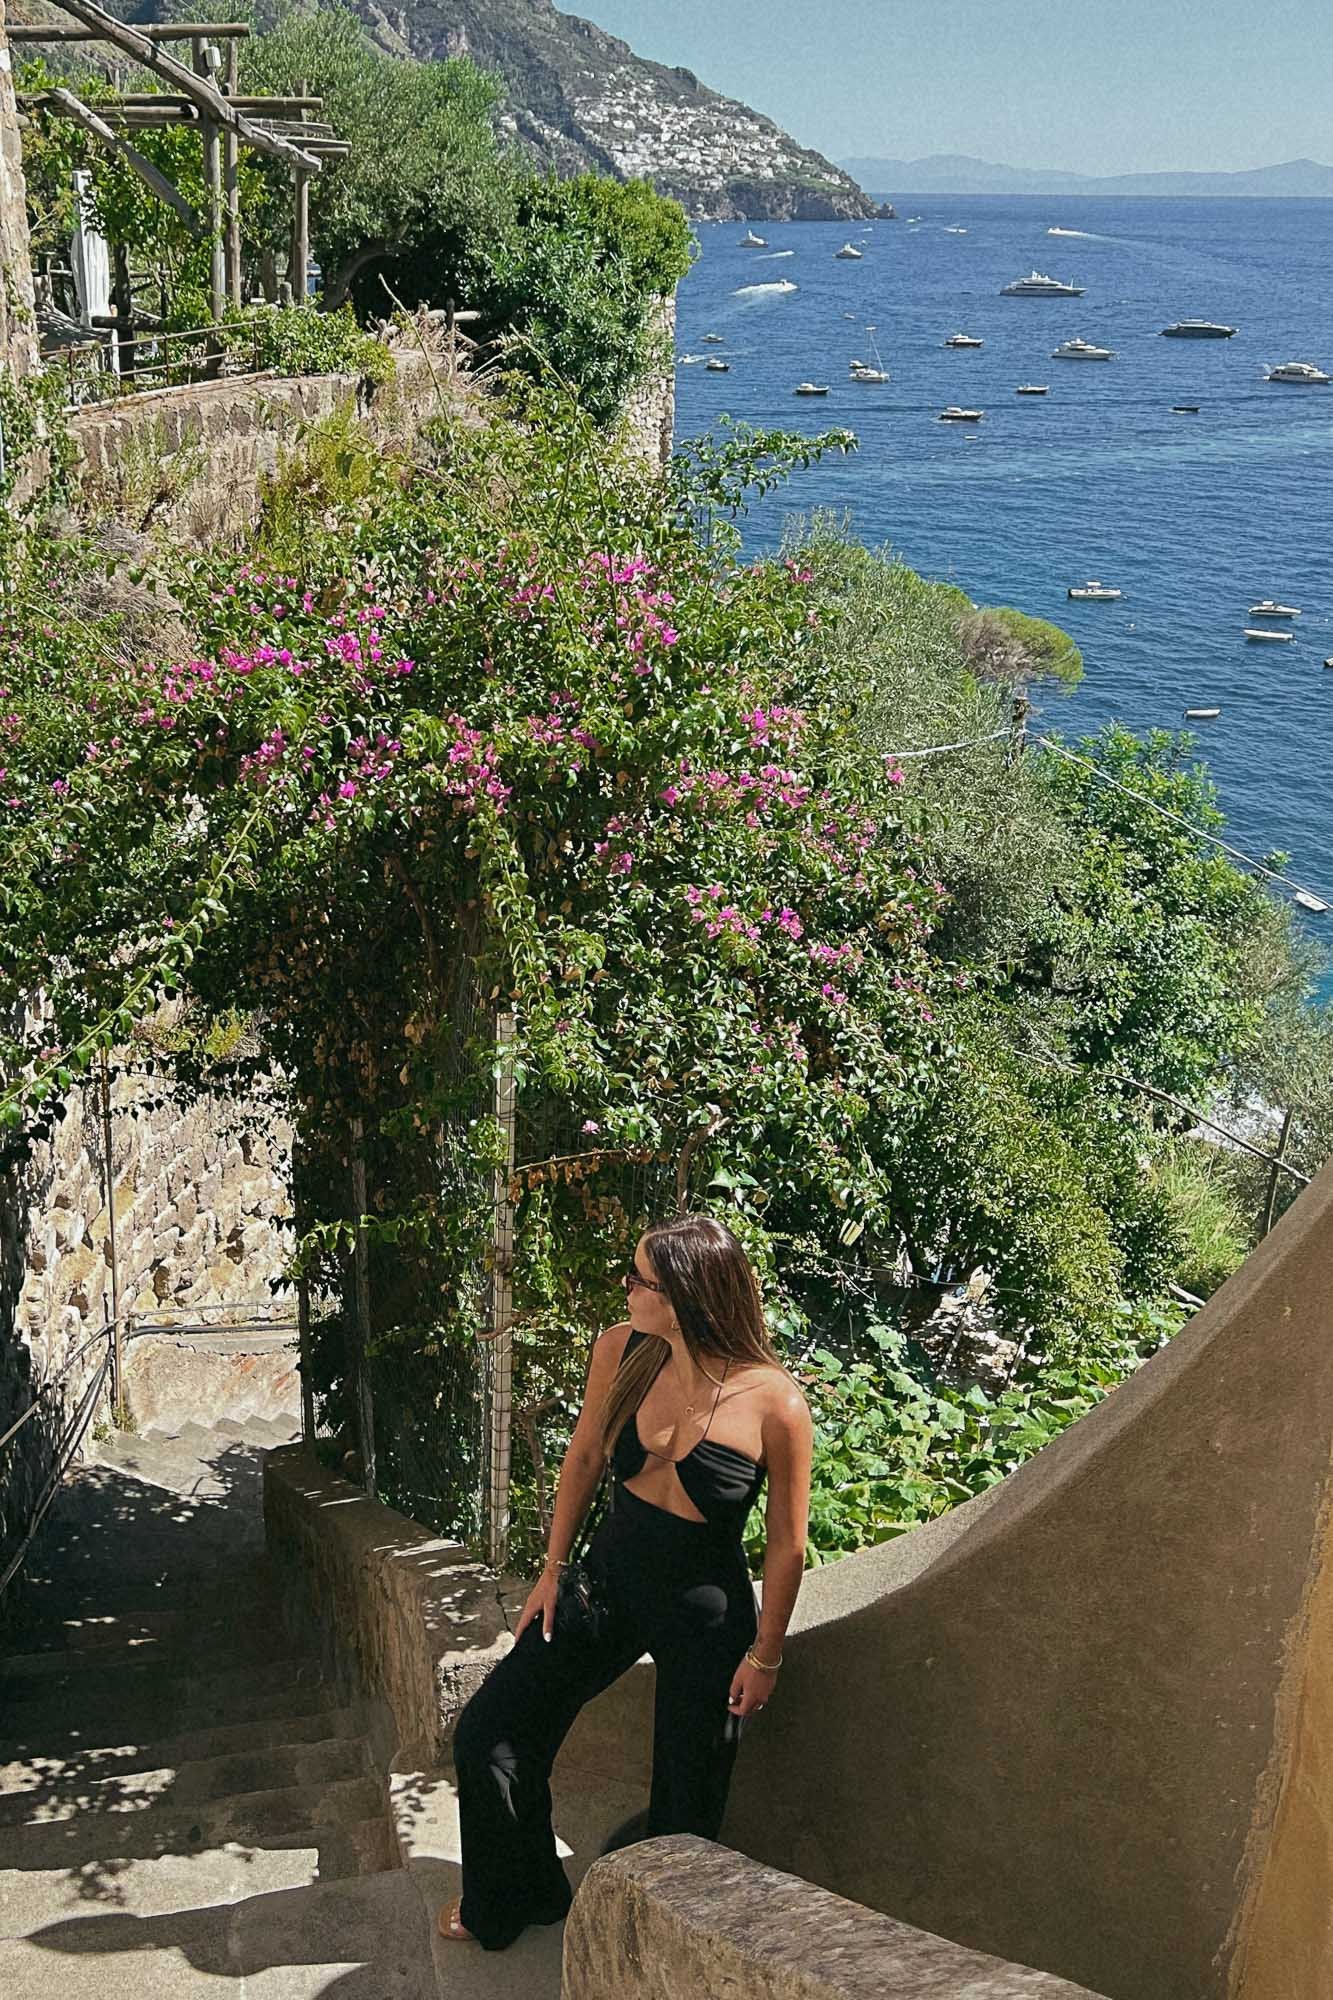 Fornillo Beach Positano. How to get there, what to eat, and what to do